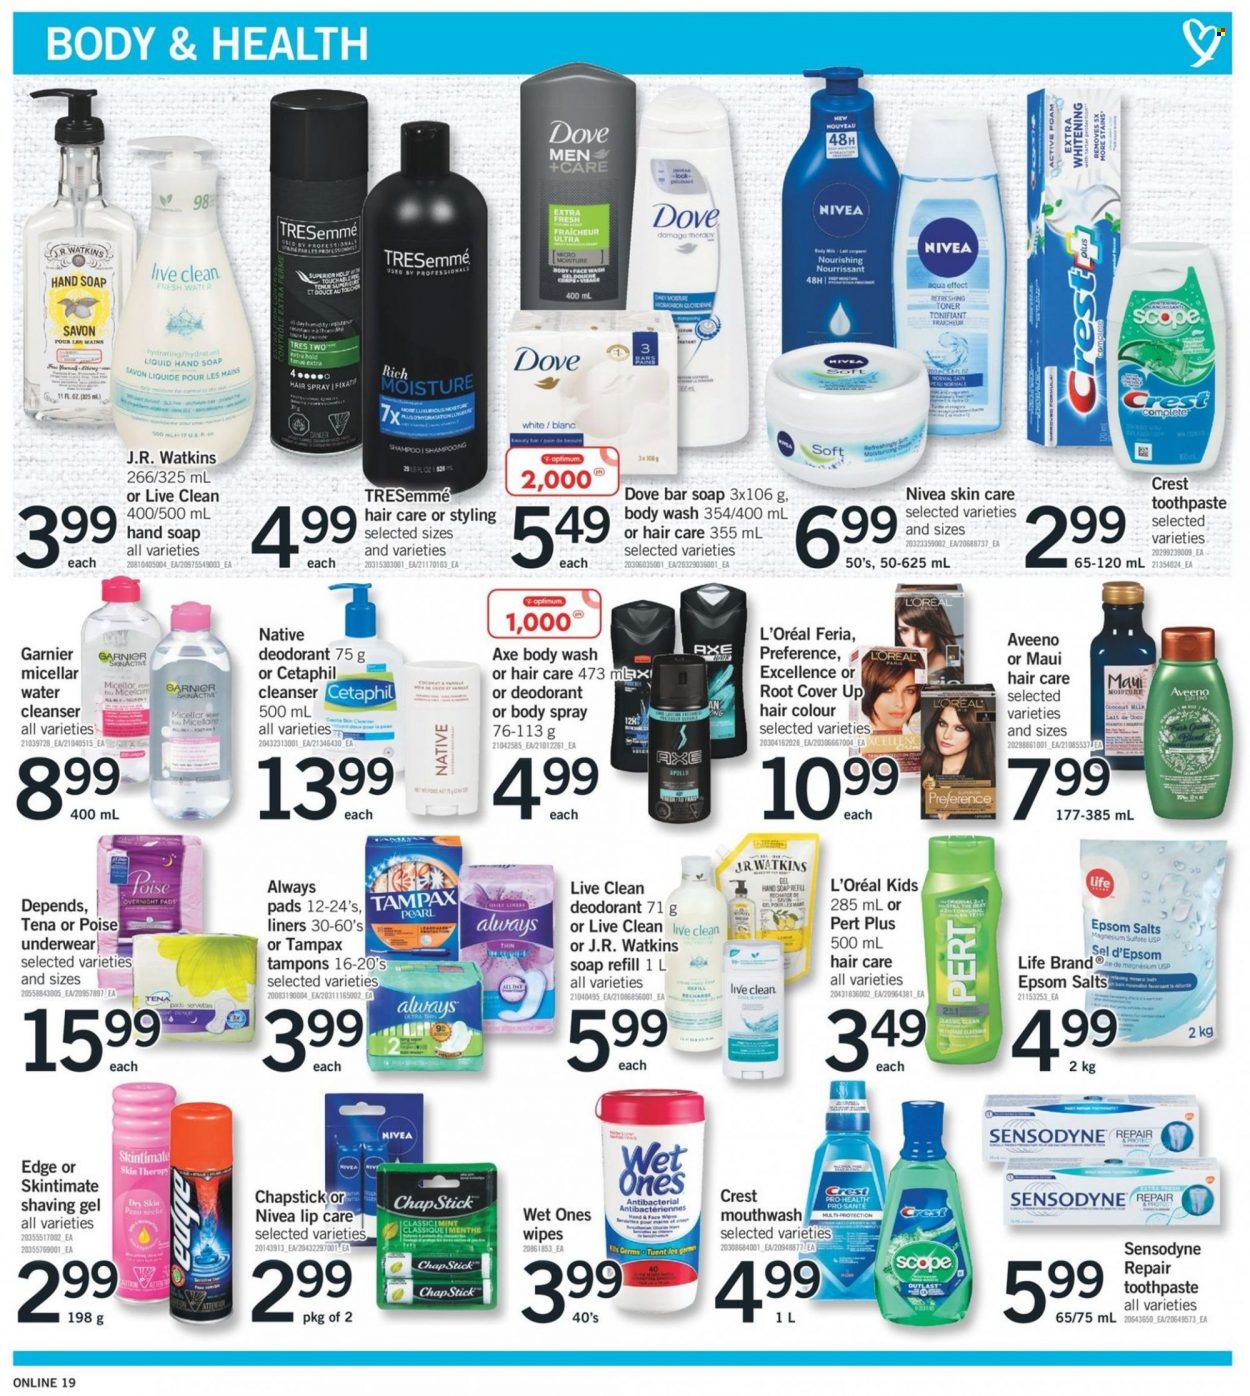 thumbnail - Fortinos Flyer - November 25, 2021 - December 01, 2021 - Sales products - wipes, Aveeno, body wash, hand soap, soap bar, soap, toothpaste, mouthwash, Crest, sanitary pads, tampons, cleanser, L’Oréal, micellar water, toner, TRESemmé, hair color, body spray, anti-perspirant, scope, Dove, Garnier, Tampax, Nivea, Sensodyne, Tena Lady, deodorant. Page 18.